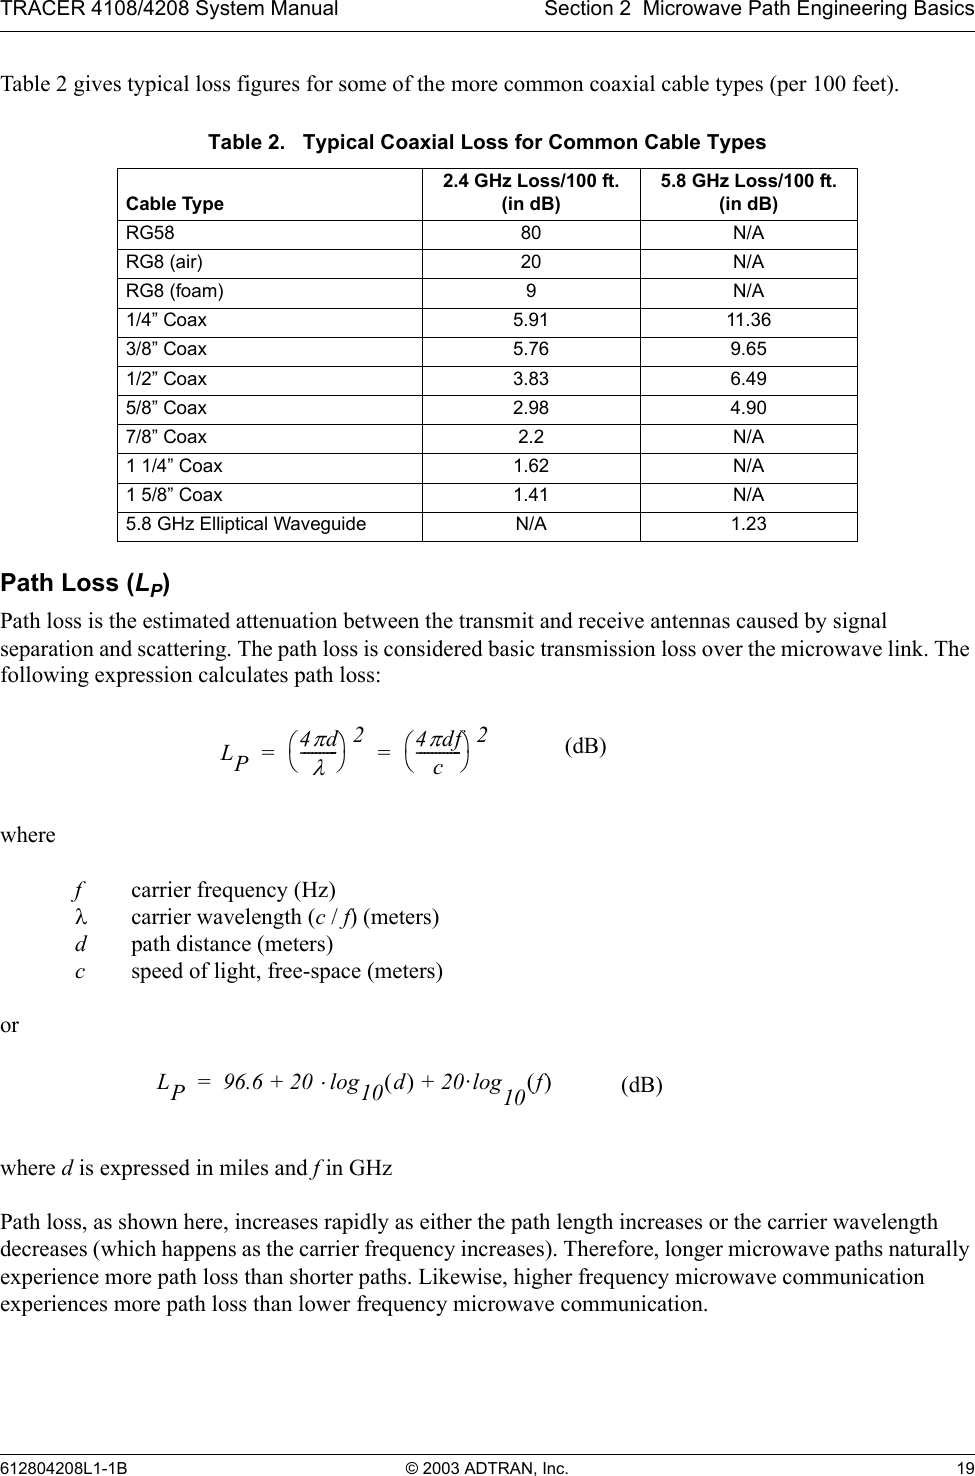 TRACER 4108/4208 System Manual Section 2  Microwave Path Engineering Basics612804208L1-1B © 2003 ADTRAN, Inc. 19Table 2 gives typical loss figures for some of the more common coaxial cable types (per 100 feet).Path Loss (LP)Path loss is the estimated attenuation between the transmit and receive antennas caused by signal separation and scattering. The path loss is considered basic transmission loss over the microwave link. The following expression calculates path loss:where fcarrier frequency (Hz)λcarrier wavelength (c / f) (meters)dpath distance (meters)cspeed of light, free-space (meters)orwhere d is expressed in miles and f in GHzPath loss, as shown here, increases rapidly as either the path length increases or the carrier wavelength decreases (which happens as the carrier frequency increases). Therefore, longer microwave paths naturally experience more path loss than shorter paths. Likewise, higher frequency microwave communication experiences more path loss than lower frequency microwave communication.Table 2.   Typical Coaxial Loss for Common Cable TypesCable Type2.4 GHz Loss/100 ft. (in dB)5.8 GHz Loss/100 ft. (in dB)RG58 80 N/ARG8 (air) 20 N/ARG8 (foam) 9 N/A1/4” Coax 5.91 11.363/8” Coax 5.76 9.651/2” Coax 3.83 6.495/8” Coax 2.98 4.907/8” Coax 2.2 N/A1 1/4” Coax 1.62 N/A1 5/8” Coax 1.41 N/A5.8 GHz Elliptical Waveguide N/A 1.23LP4πdλ----------24πdfc------------2== (dB)LP96.6 20 log10 d() 20·log+10 f()⋅+= (dB)